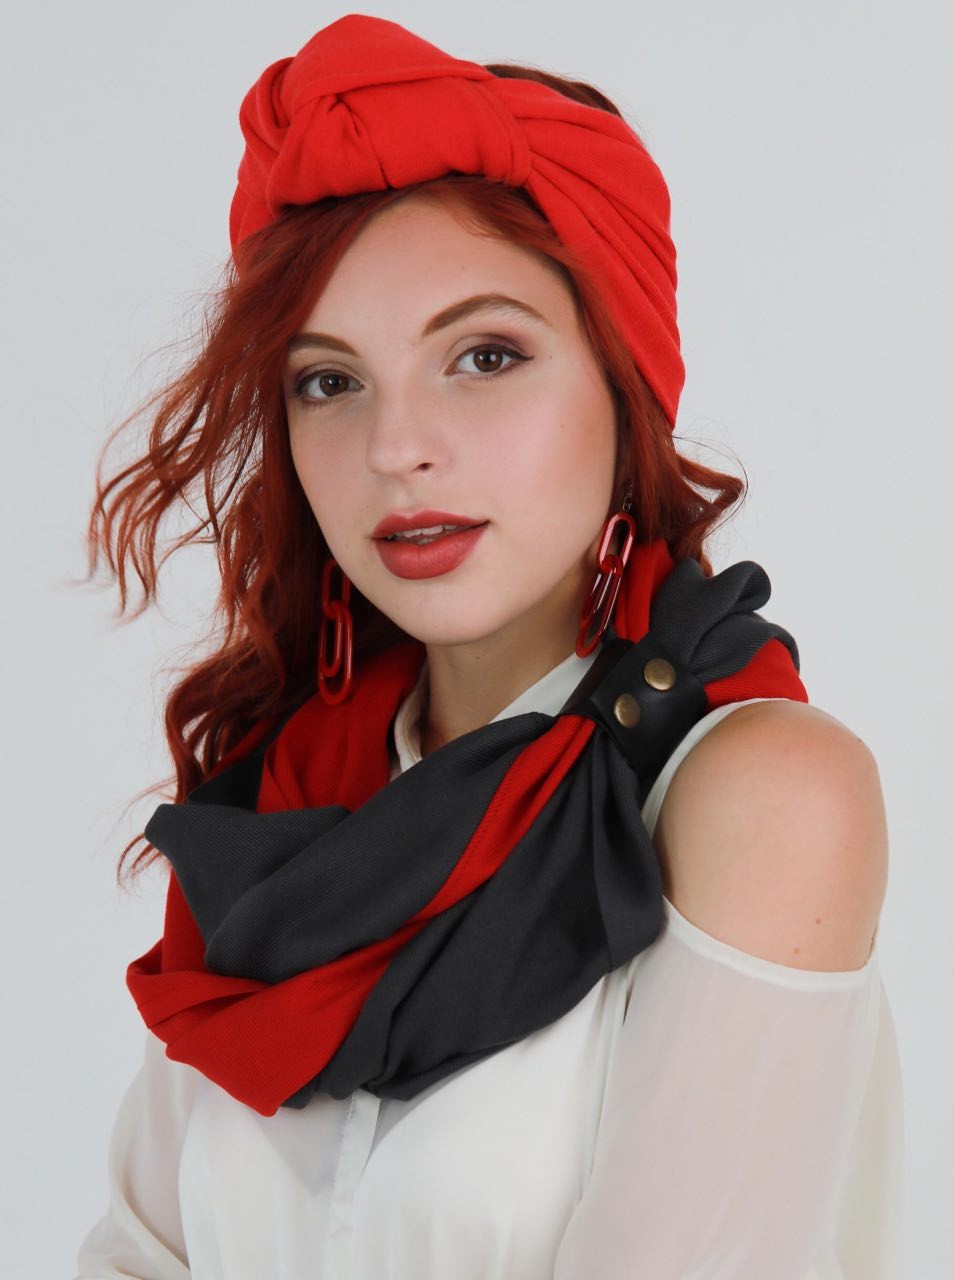 Cashmere stylish scarf Snood Black and white from the designer Art Sana